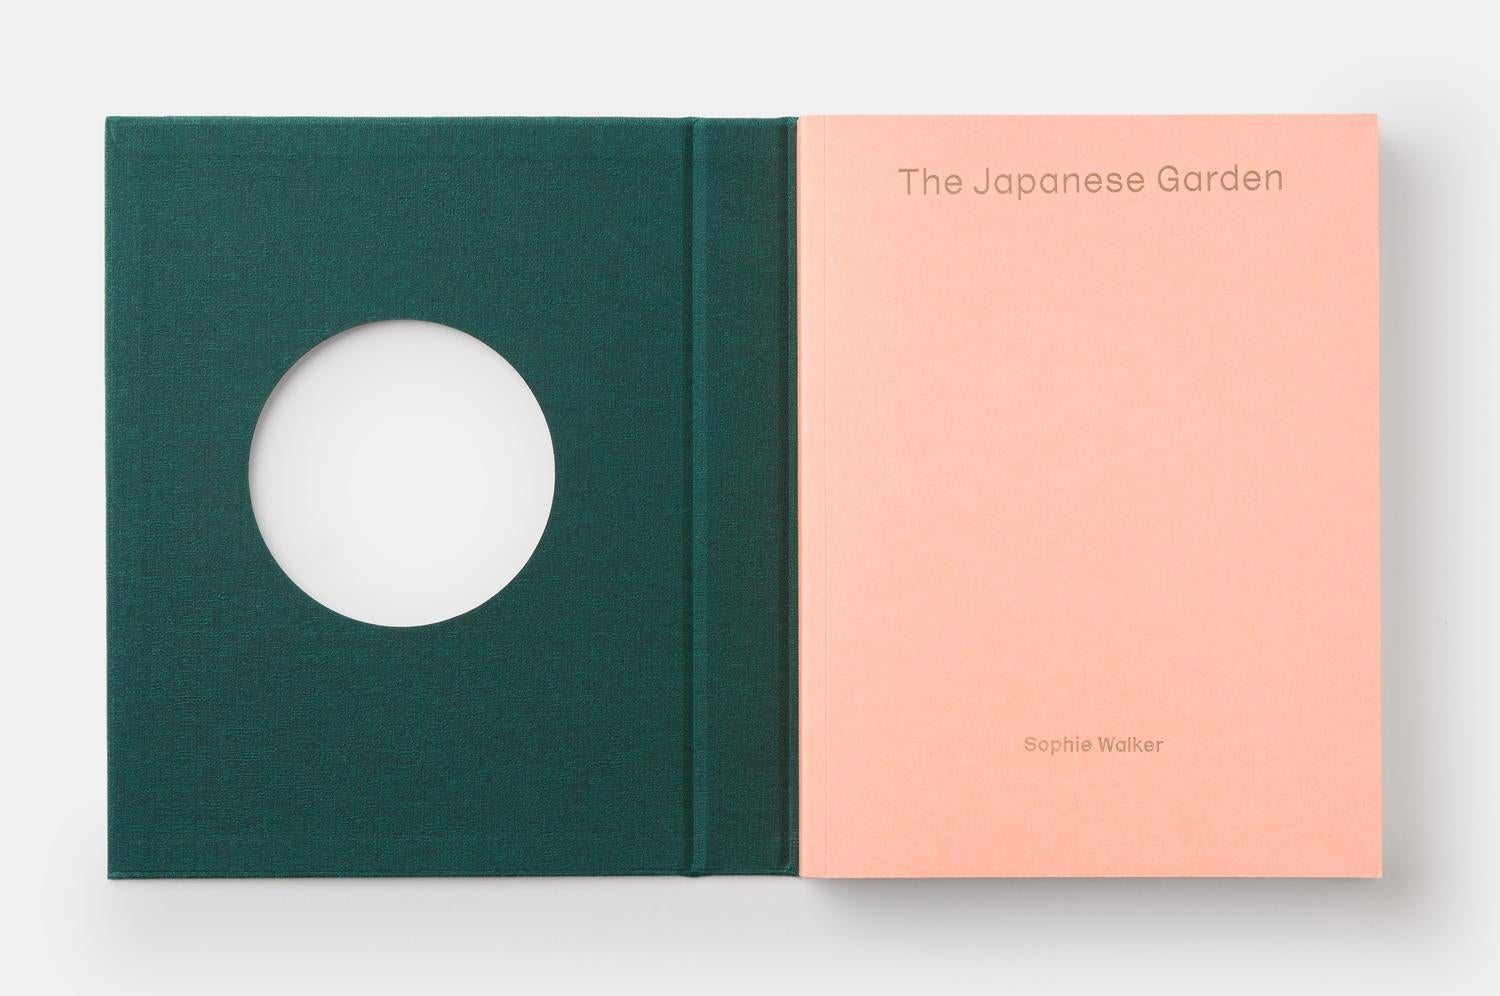 An in-depth exploration spanning 800 years of the art, essence, and enduring impact of the Japanese garden. 

The most comprehensive exploration of the art of the Japanese garden published to date, this book covers more than eight centuries of the